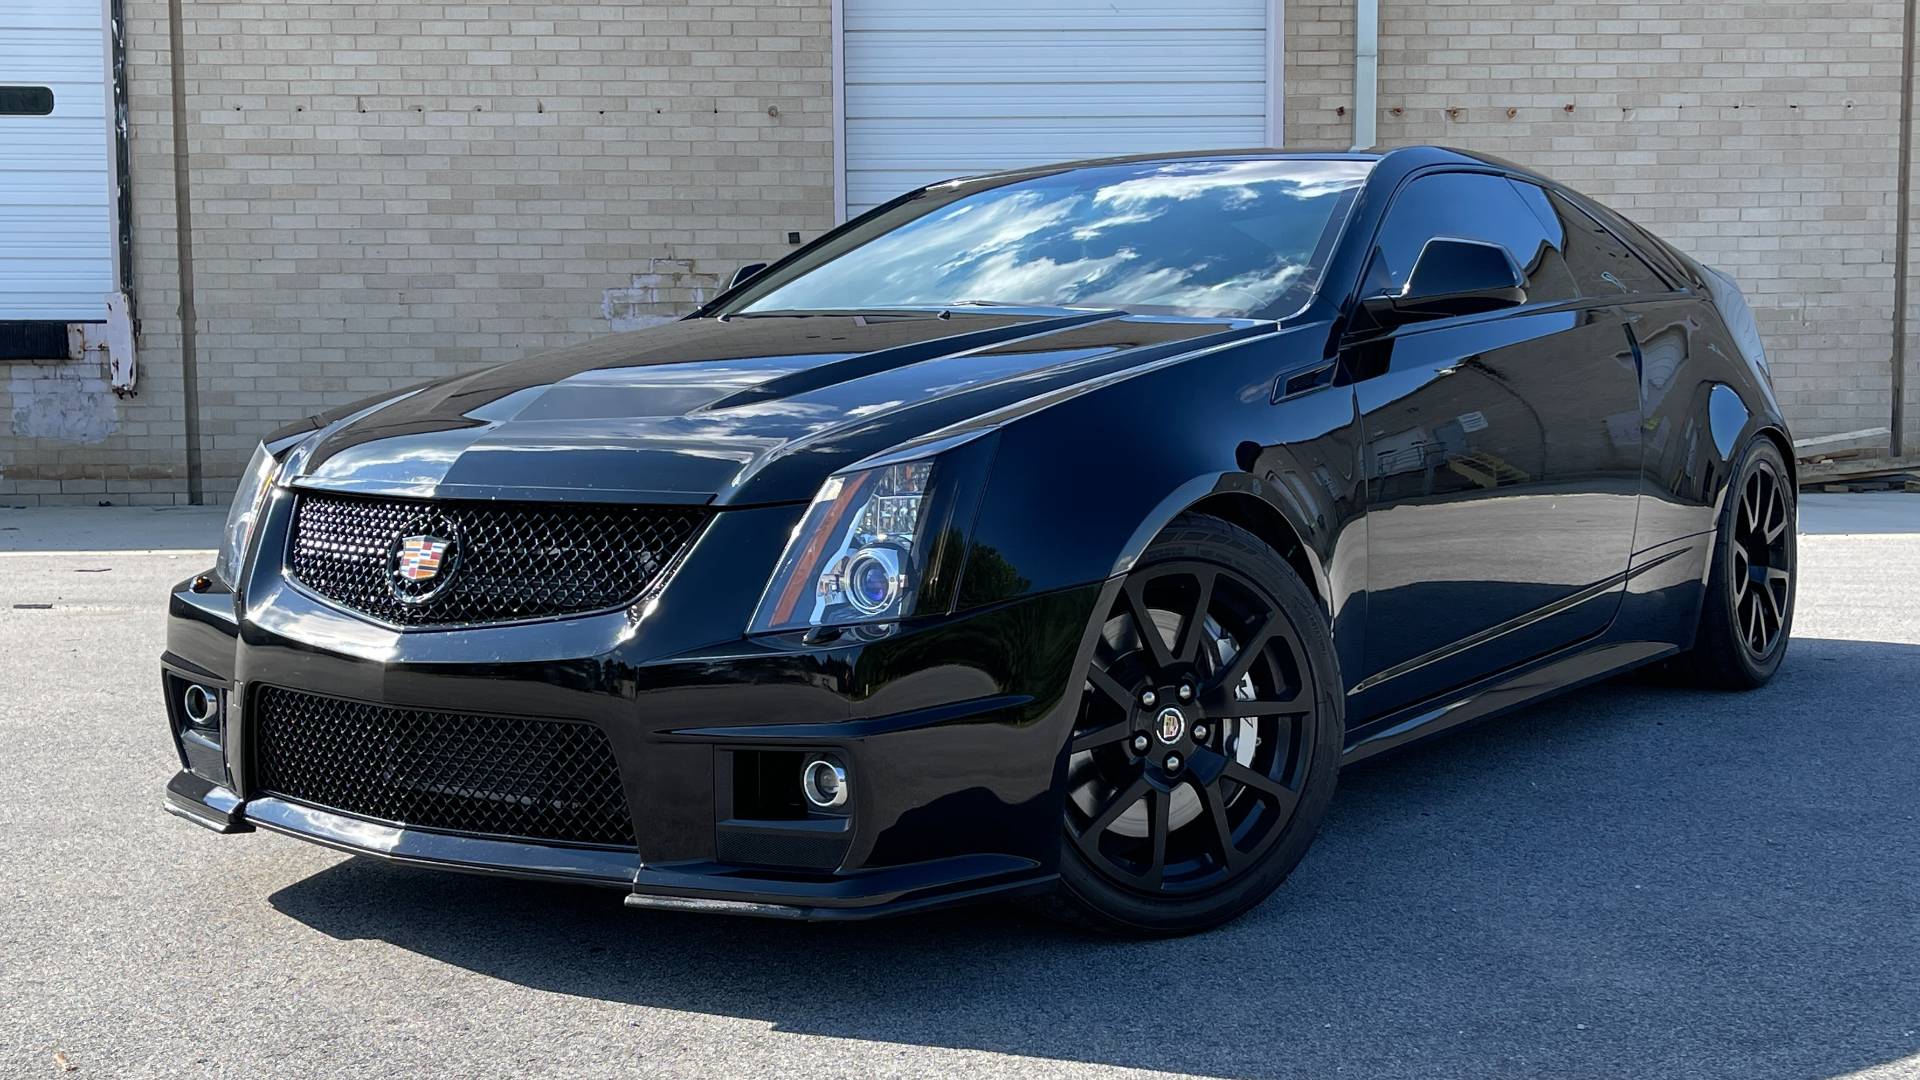 Used 2011 Cadillac CTS-V COUPE 6.2L 600HP+ / NAV / BOSE / SUNROOF / RECARO / 19IN WHLS / REARVIEW for sale $39,995 at Formula Imports in Charlotte NC 28227 2